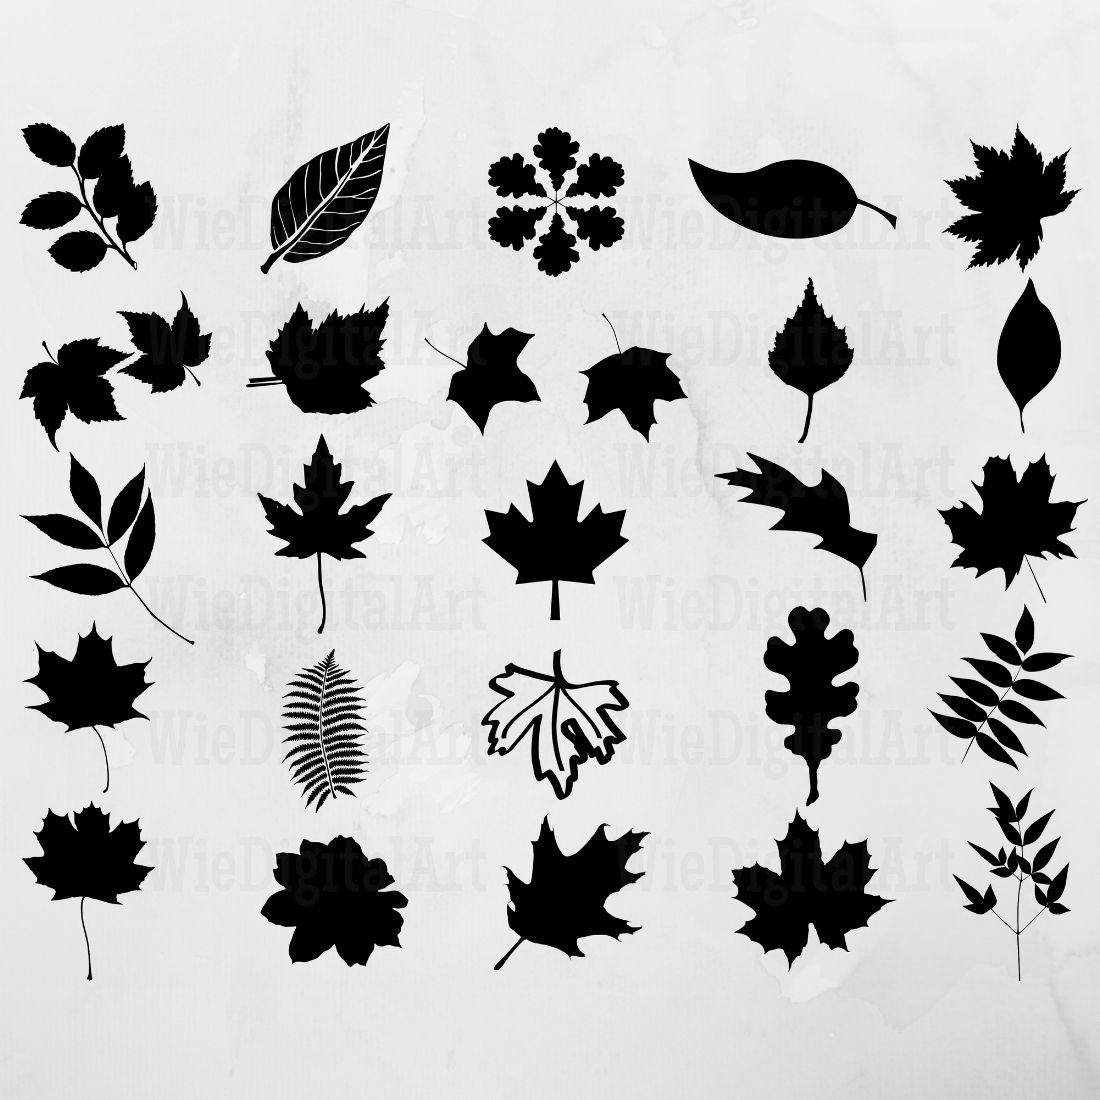 Autumn Leaves SVG & Autumn Leaves Silhouette previews image.